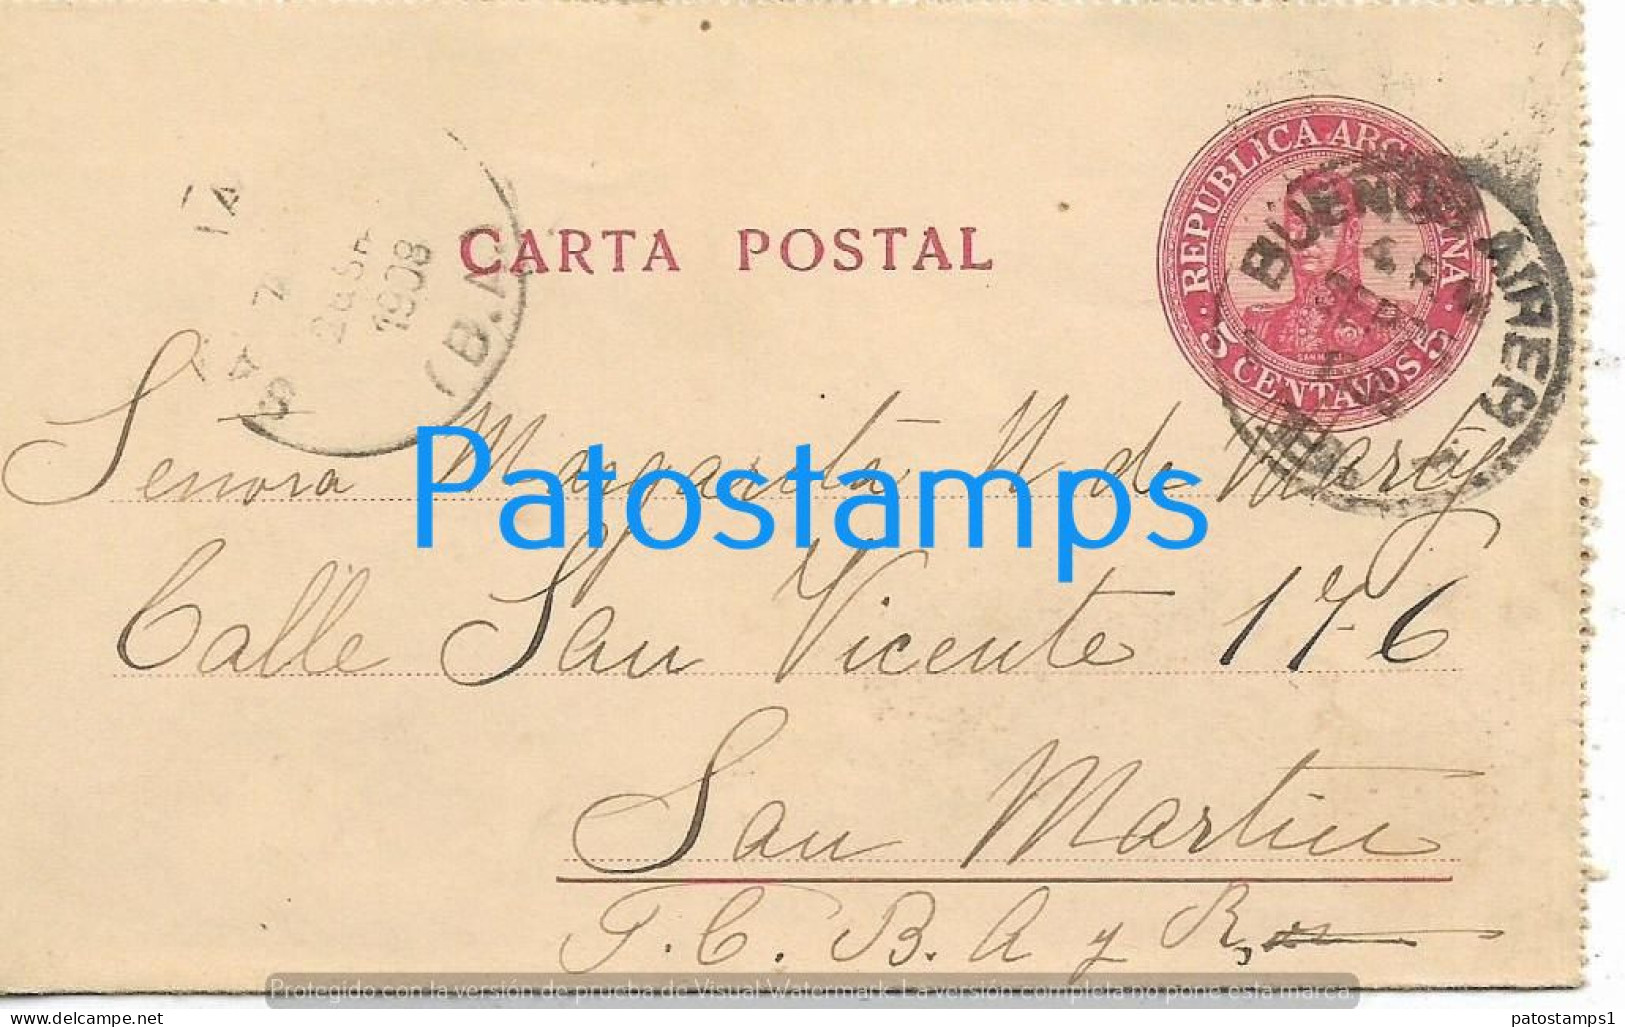 225687 ARGENTINA BUENOS AIRES CANCEL YEAR 1908 CIRCULATED TO SAN MARTIN POSTAL STATIONERY NOPOSTCARD - Postal Stationery